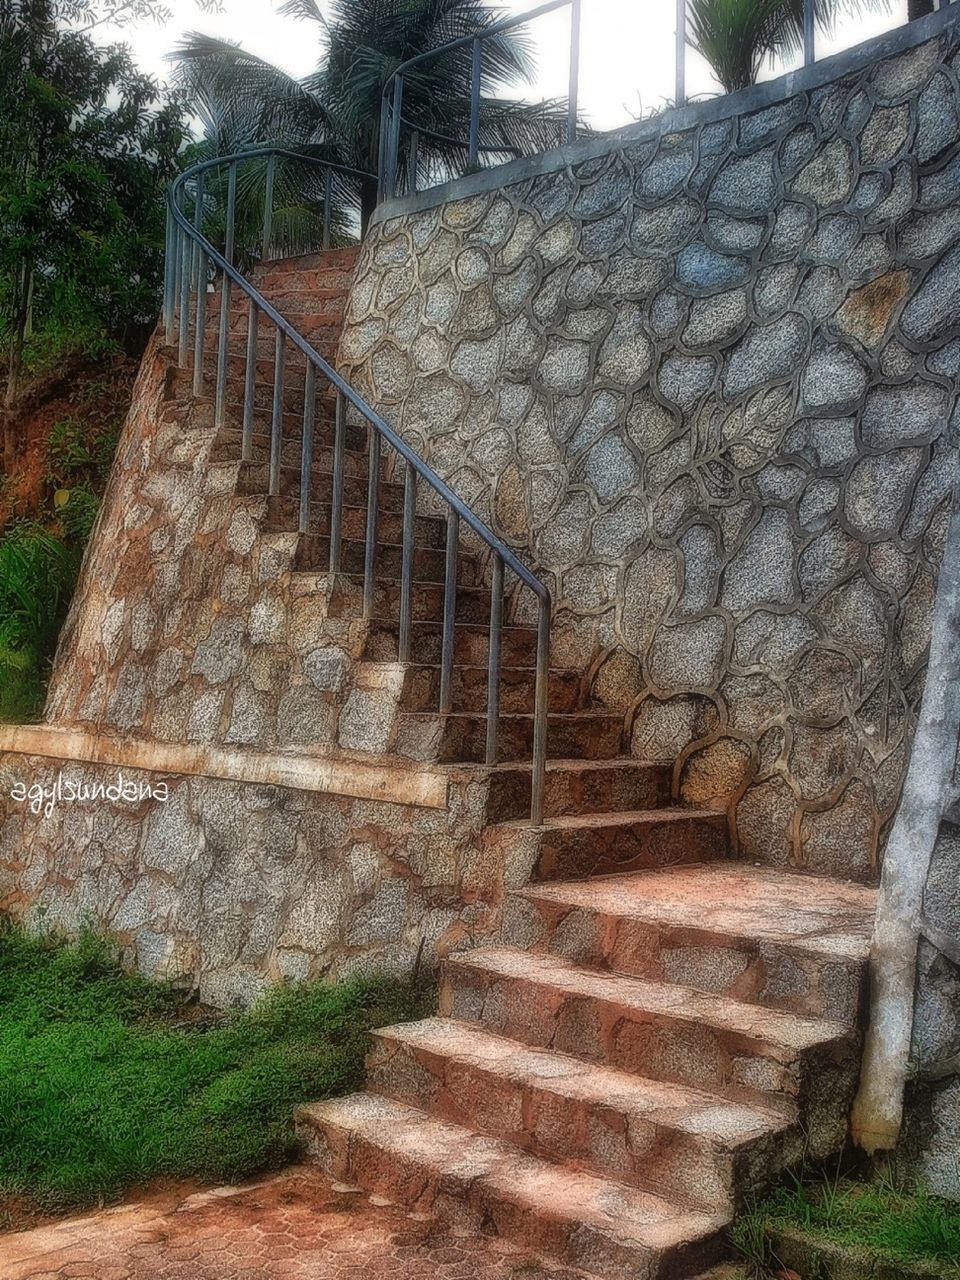 steps, built structure, architecture, steps and staircases, staircase, building exterior, tree, railing, plant, the way forward, wall - building feature, day, sunlight, outdoors, growth, no people, grass, park - man made space, stone wall, footpath